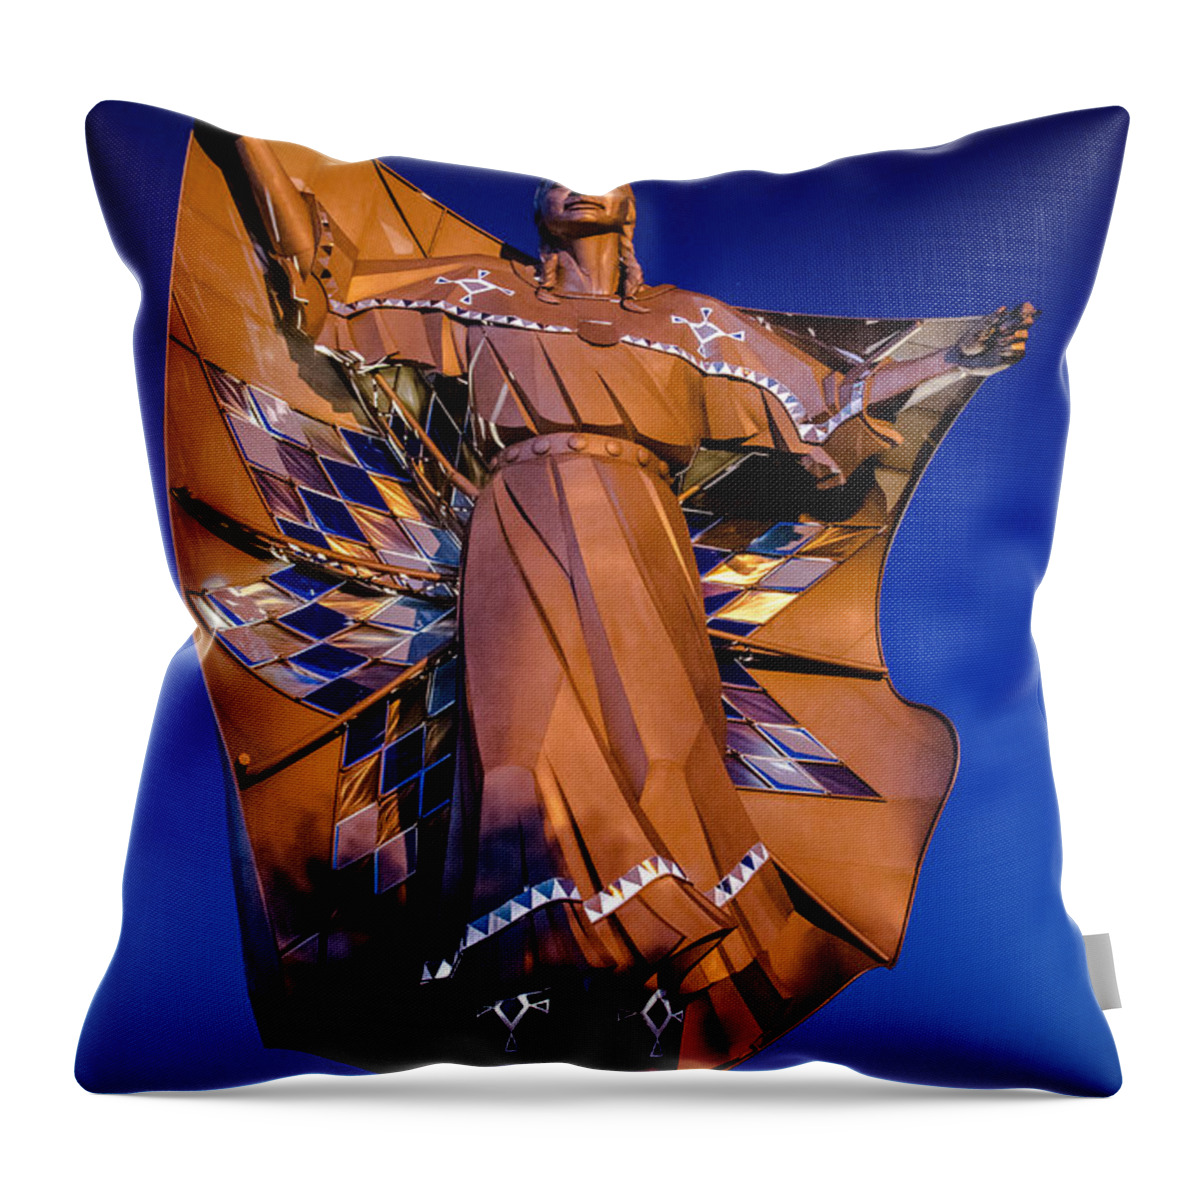 Dignity Throw Pillow featuring the photograph Dignity by Flowstate Photography